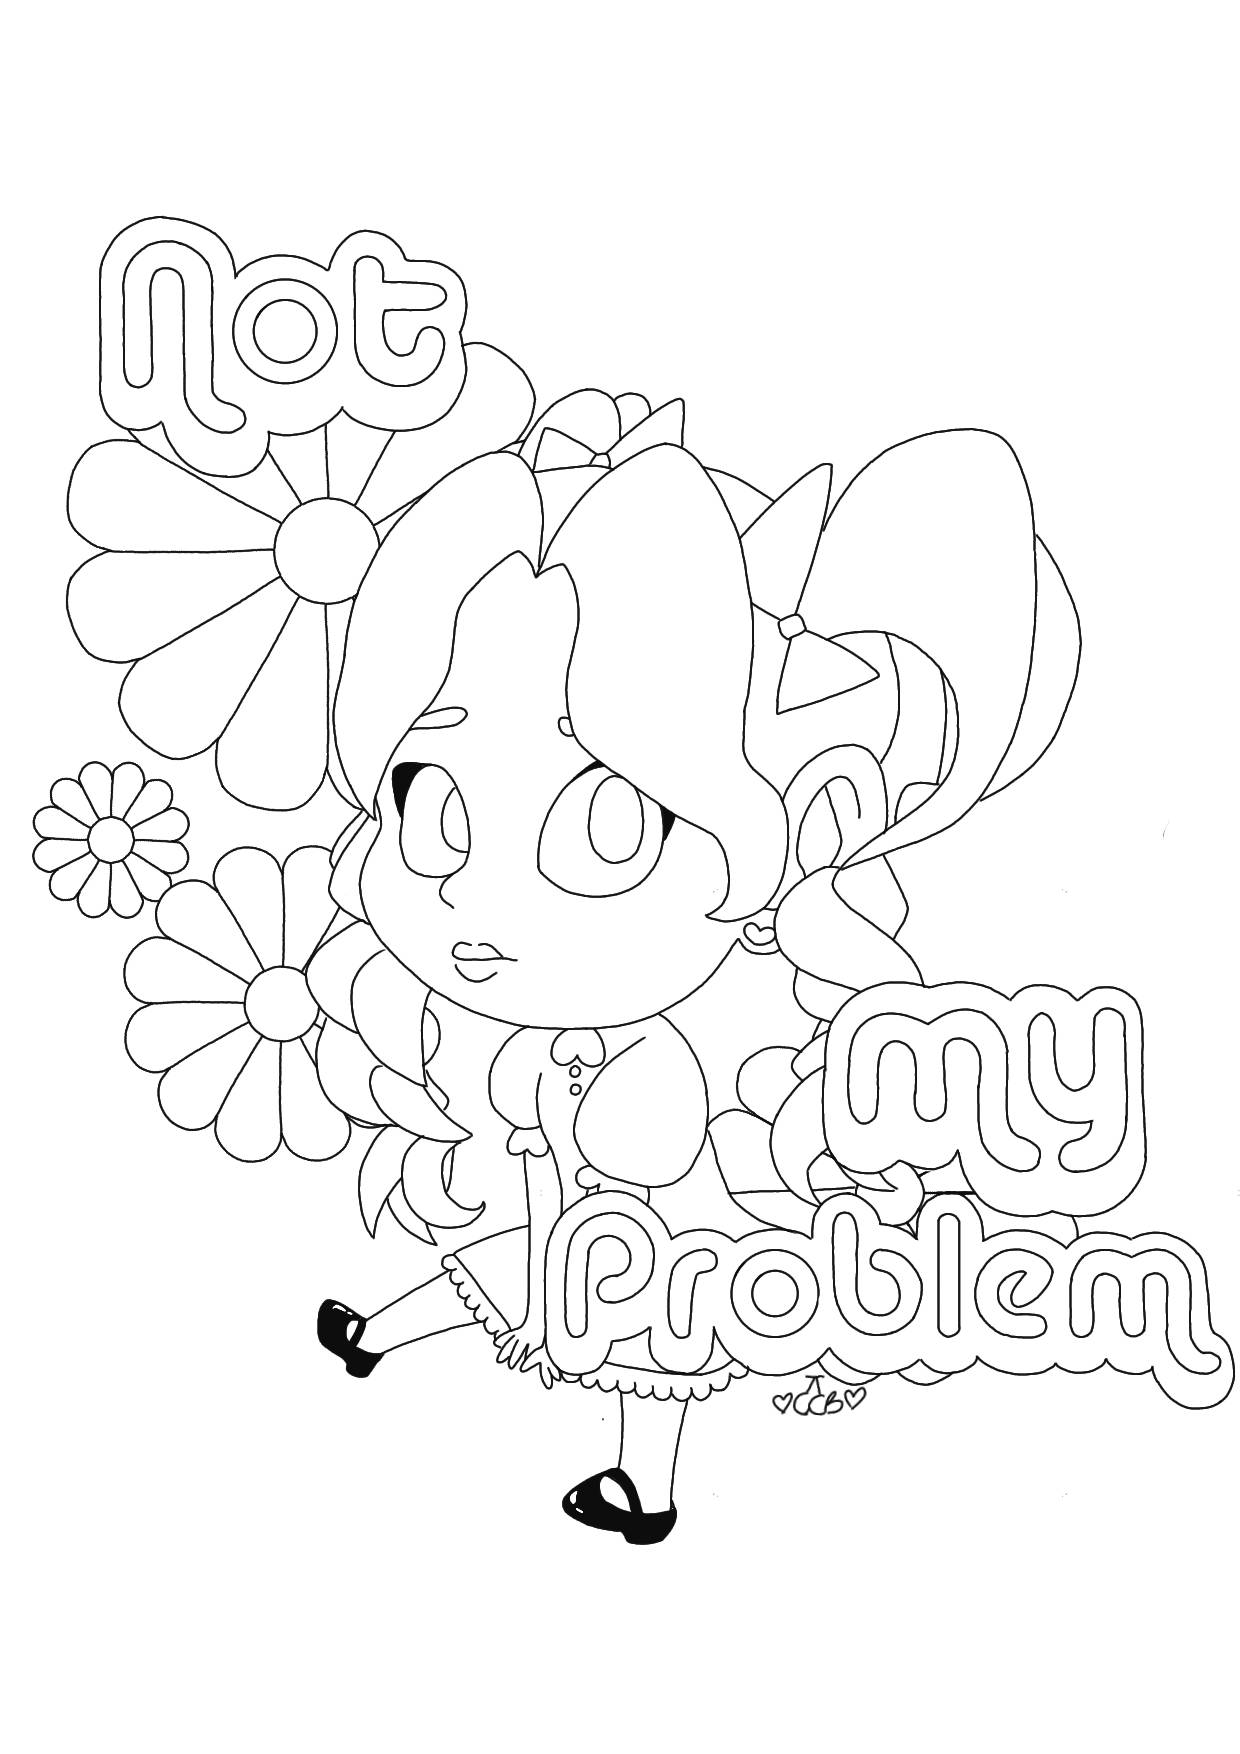 Bratz Coloring Pages 42 by coloringpageswk on DeviantArt